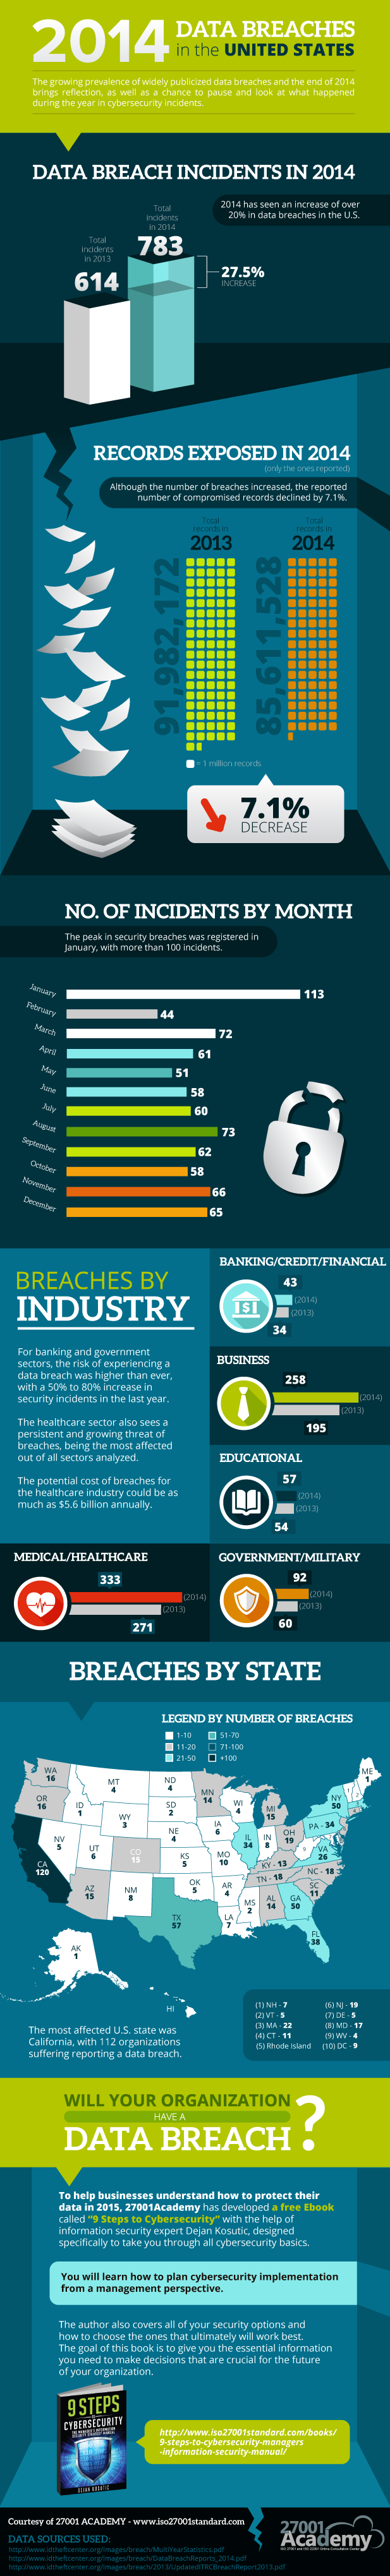 2014-Data-Breaches-in-the-United-States-Infographic1